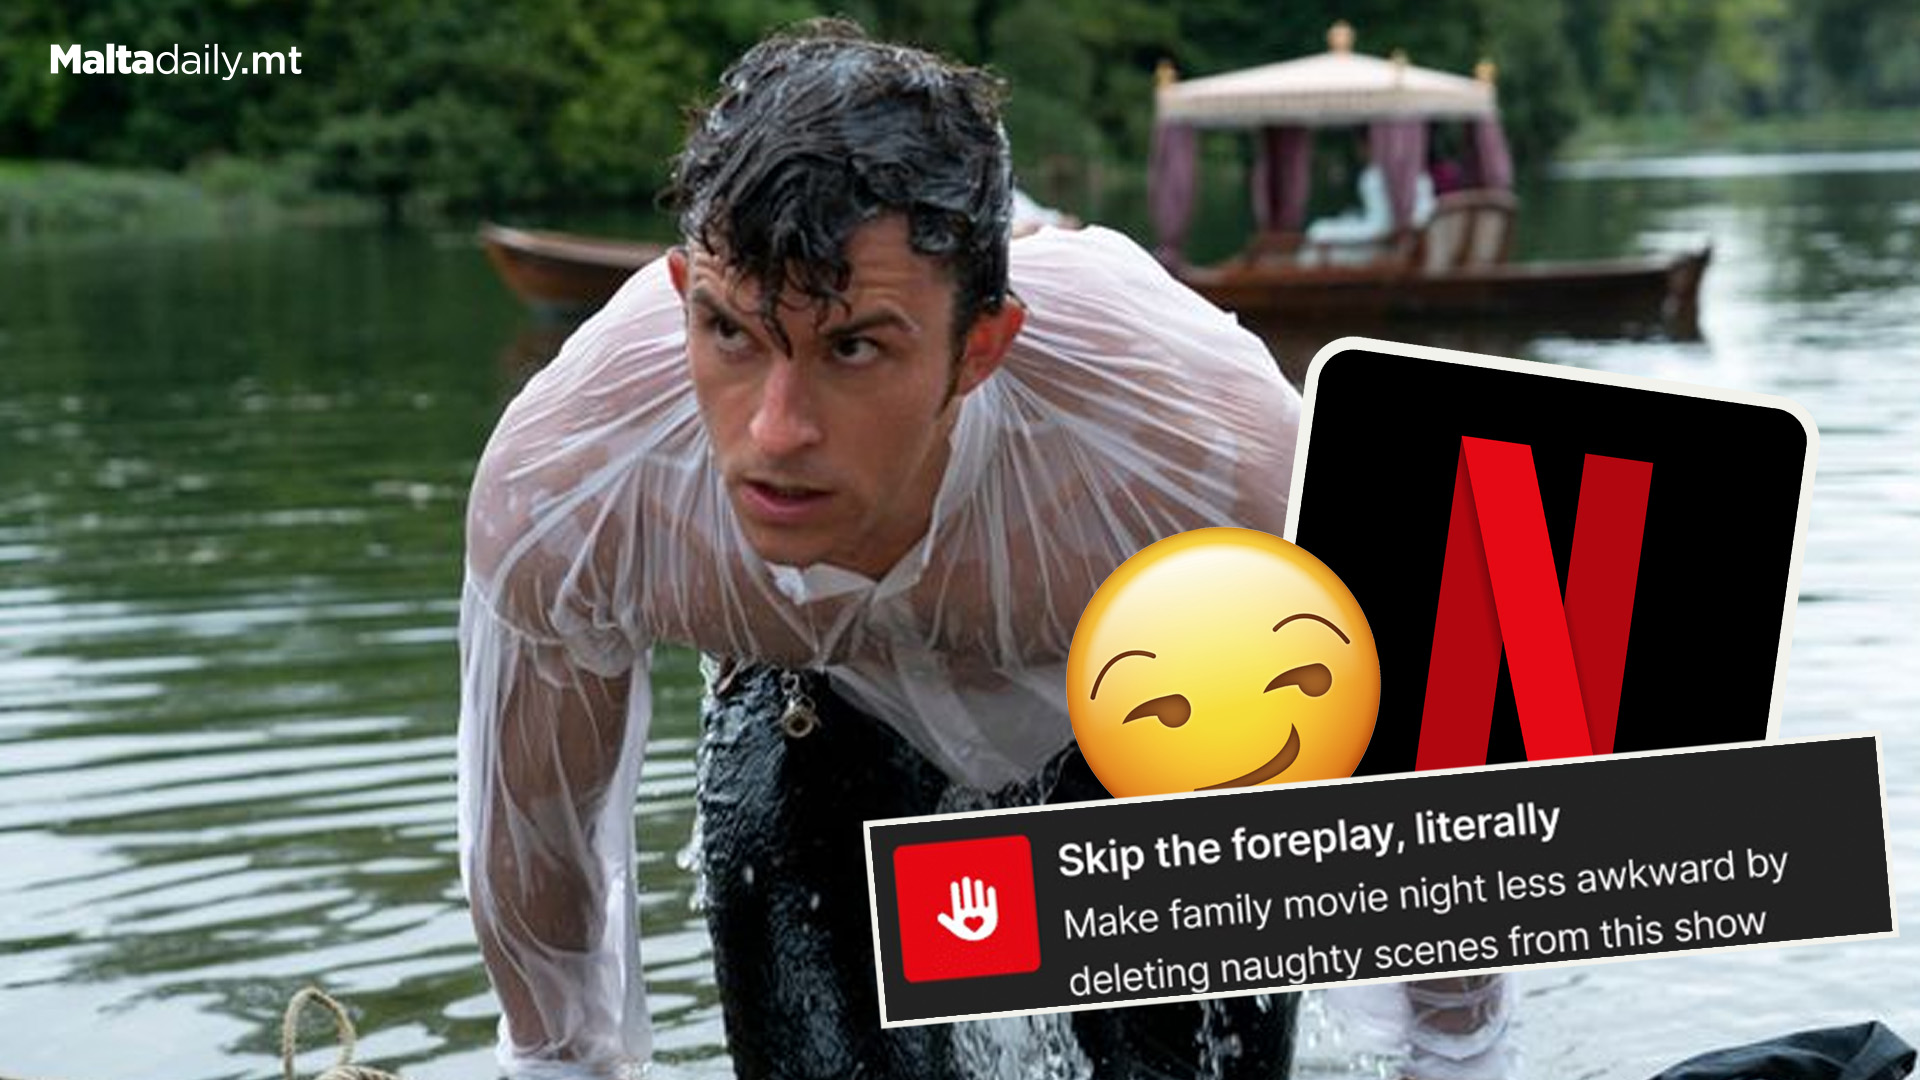 Netflix Users Fooled With Fake 'Remove Naughty Scenes' Feature